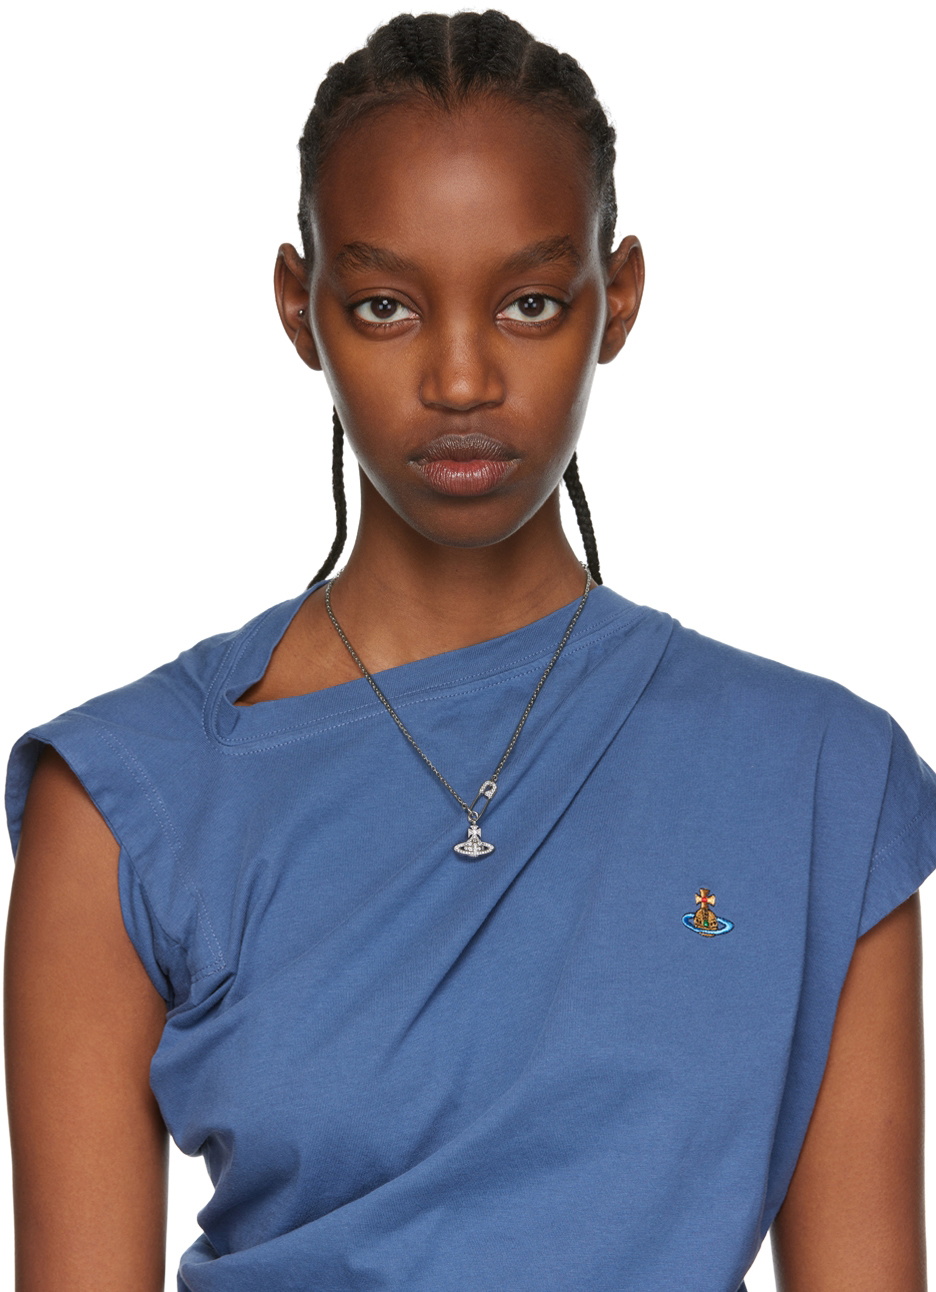 Vivienne Westwood Lucrece Safety Pin Necklace